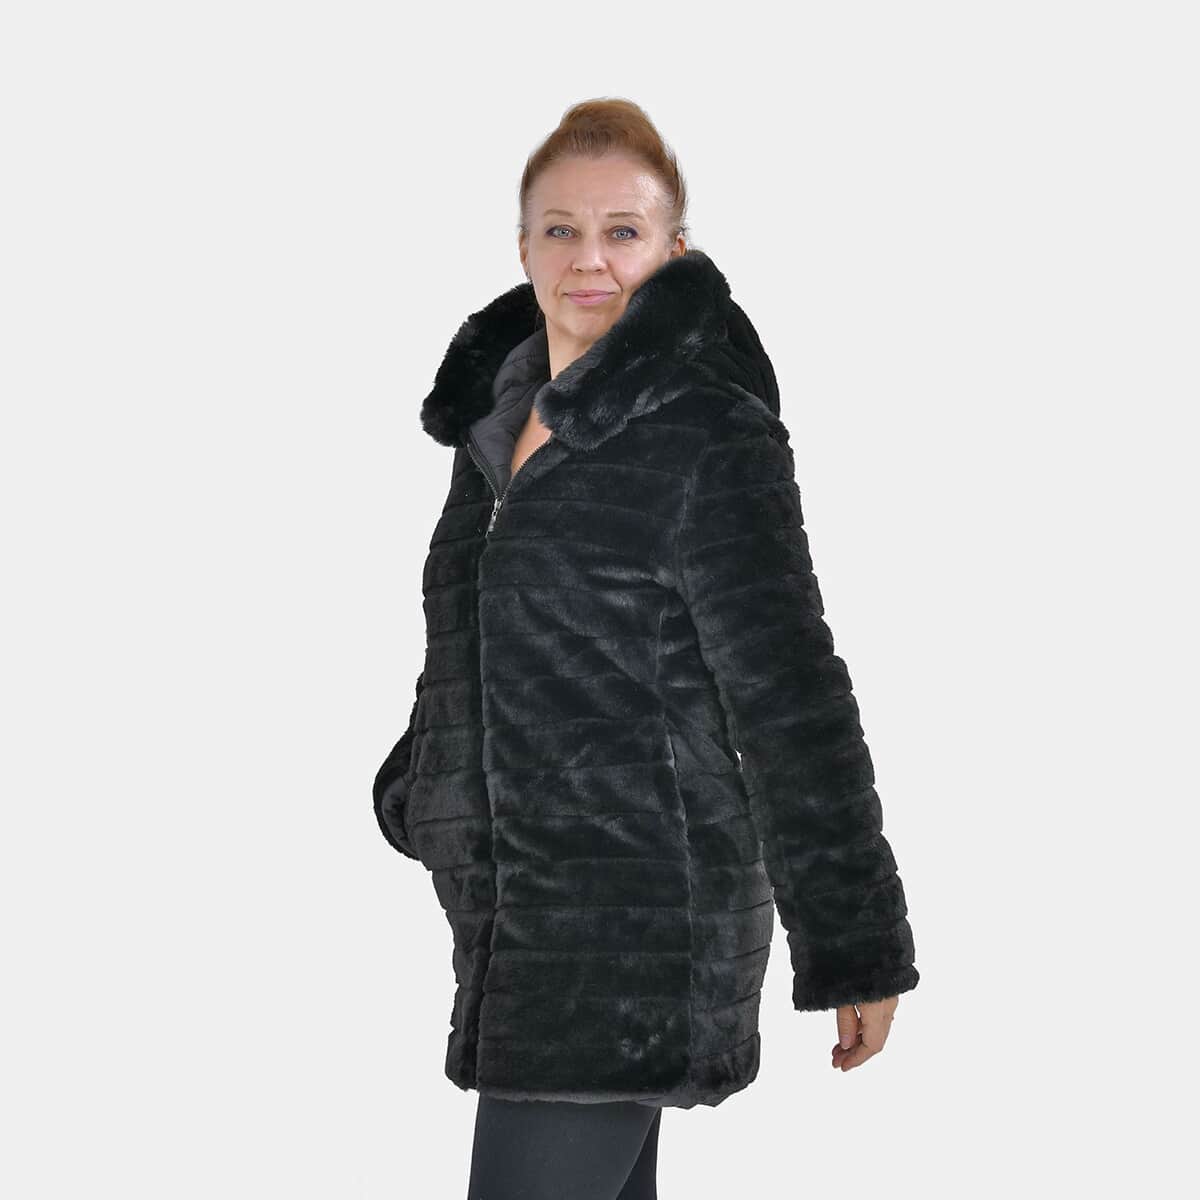 Tamsy Black Reversible Faux Fur and Puffer Jacket with Hood - L image number 7